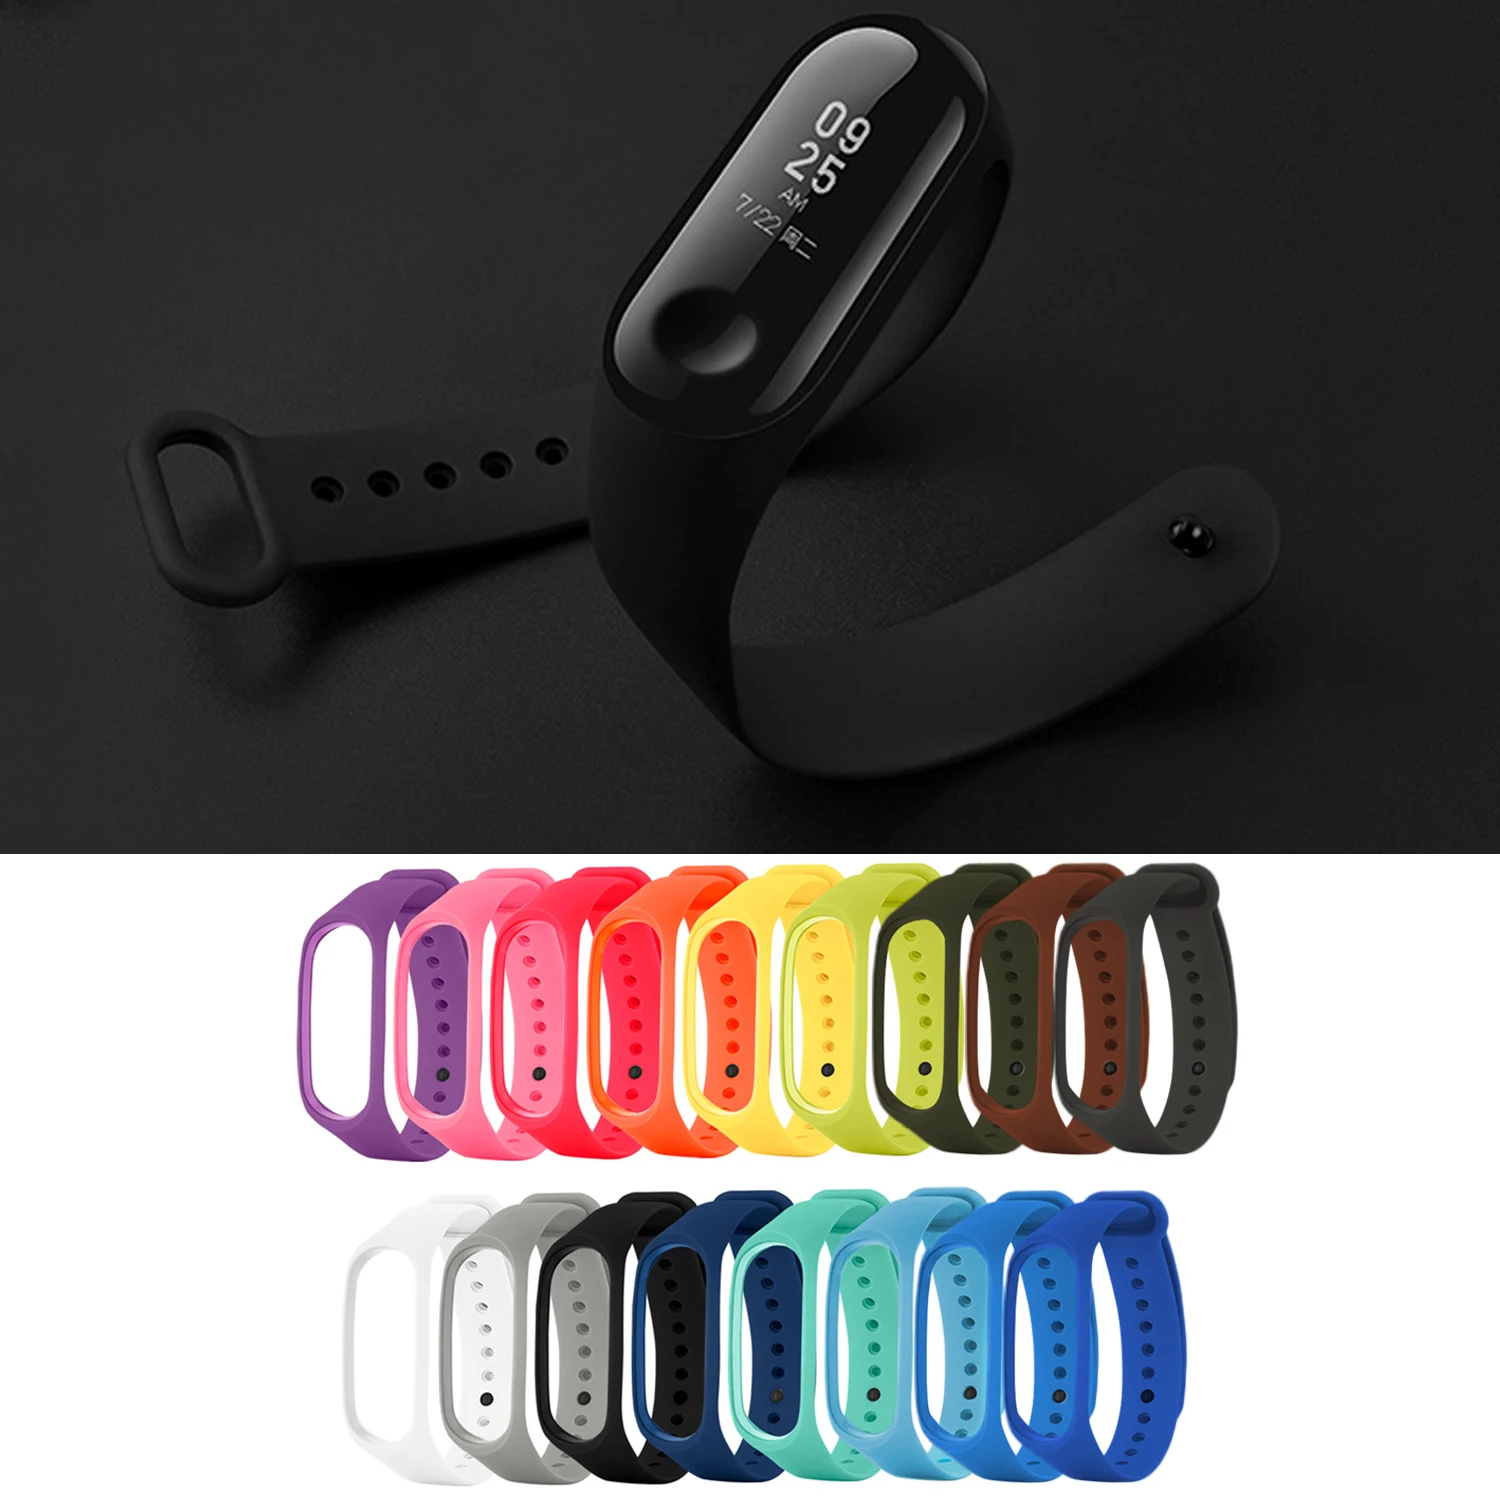 

Gosear 17PCS Assorted Color Fashion Replacement Wristband Wrist Strap Band for Xiaomi Mi Band 3 4 Smart Bracelet Accessories